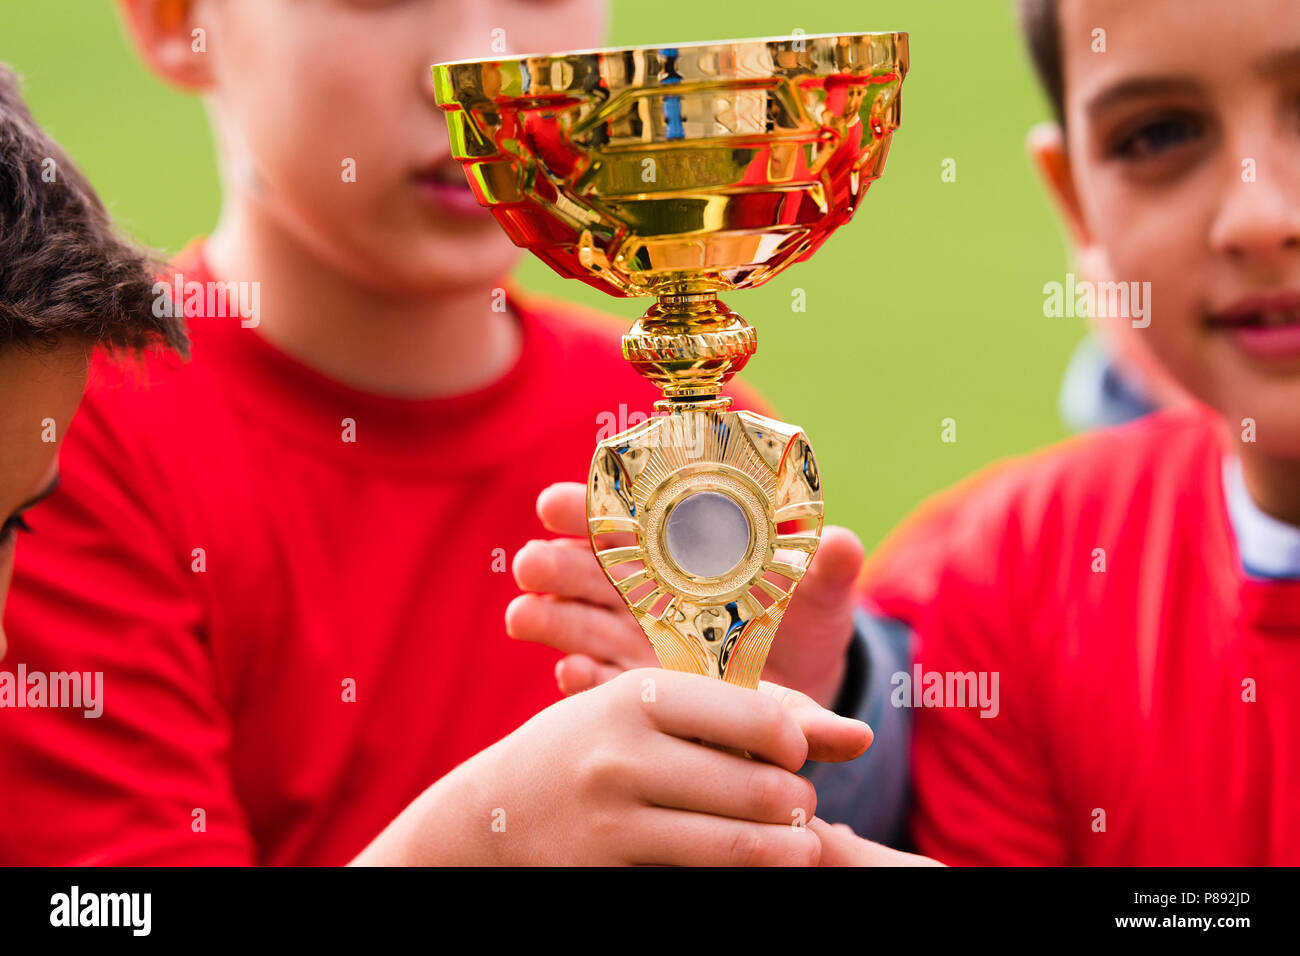 Kids soccer football - young children players celebrating with a trophy after match on soccer field Stock Photo